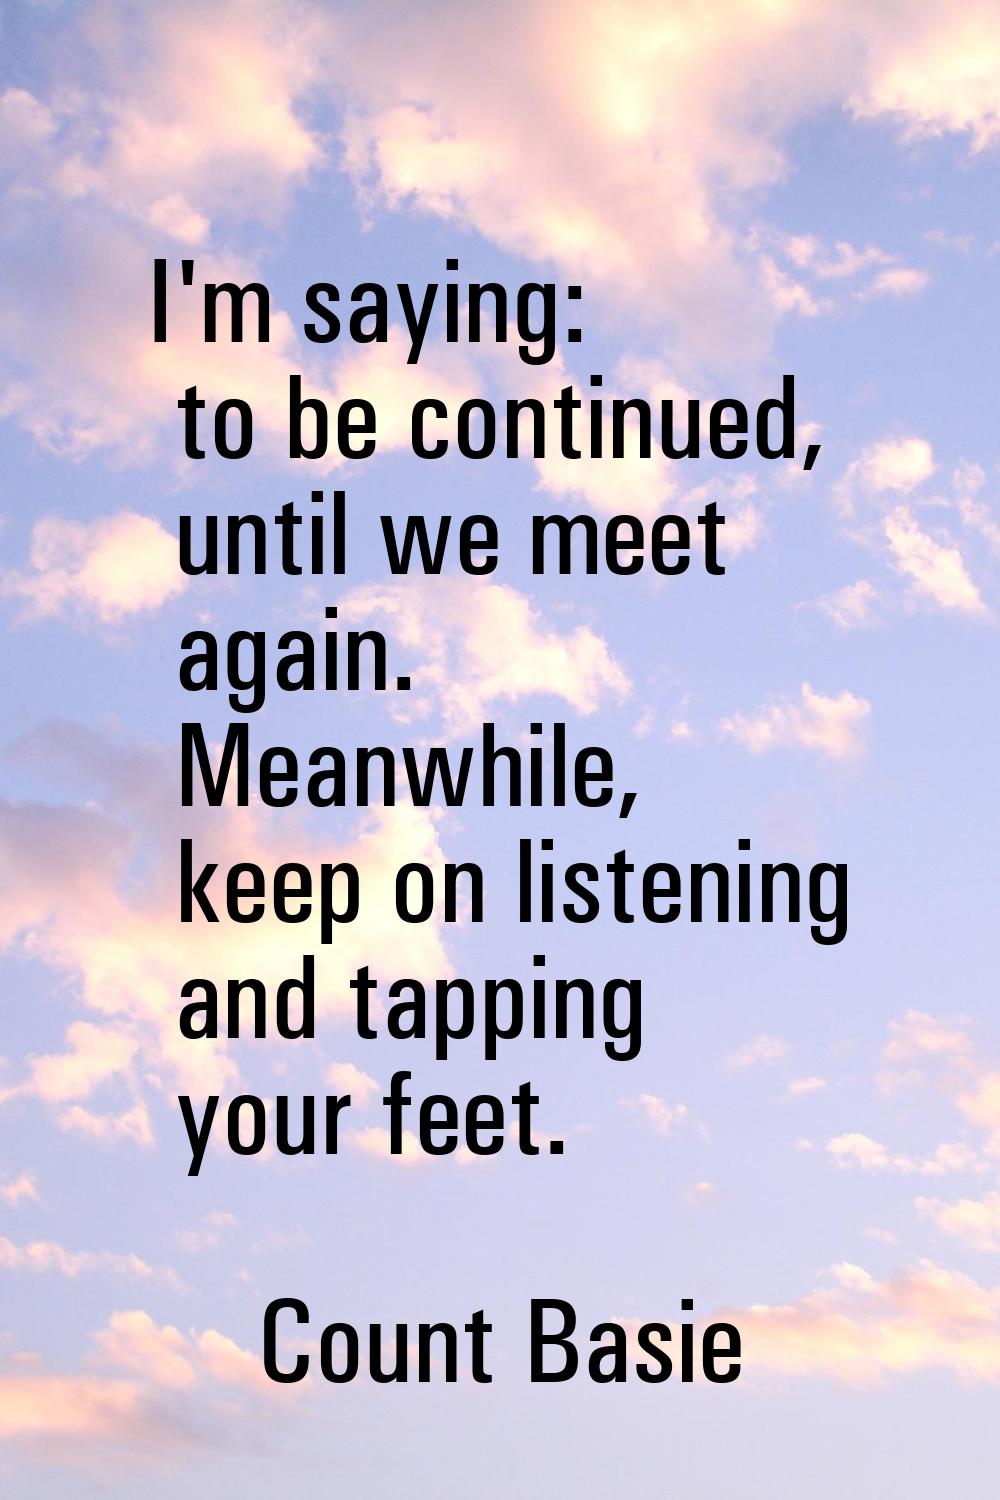 I'm saying: to be continued, until we meet again. Meanwhile, keep on listening and tapping your fee